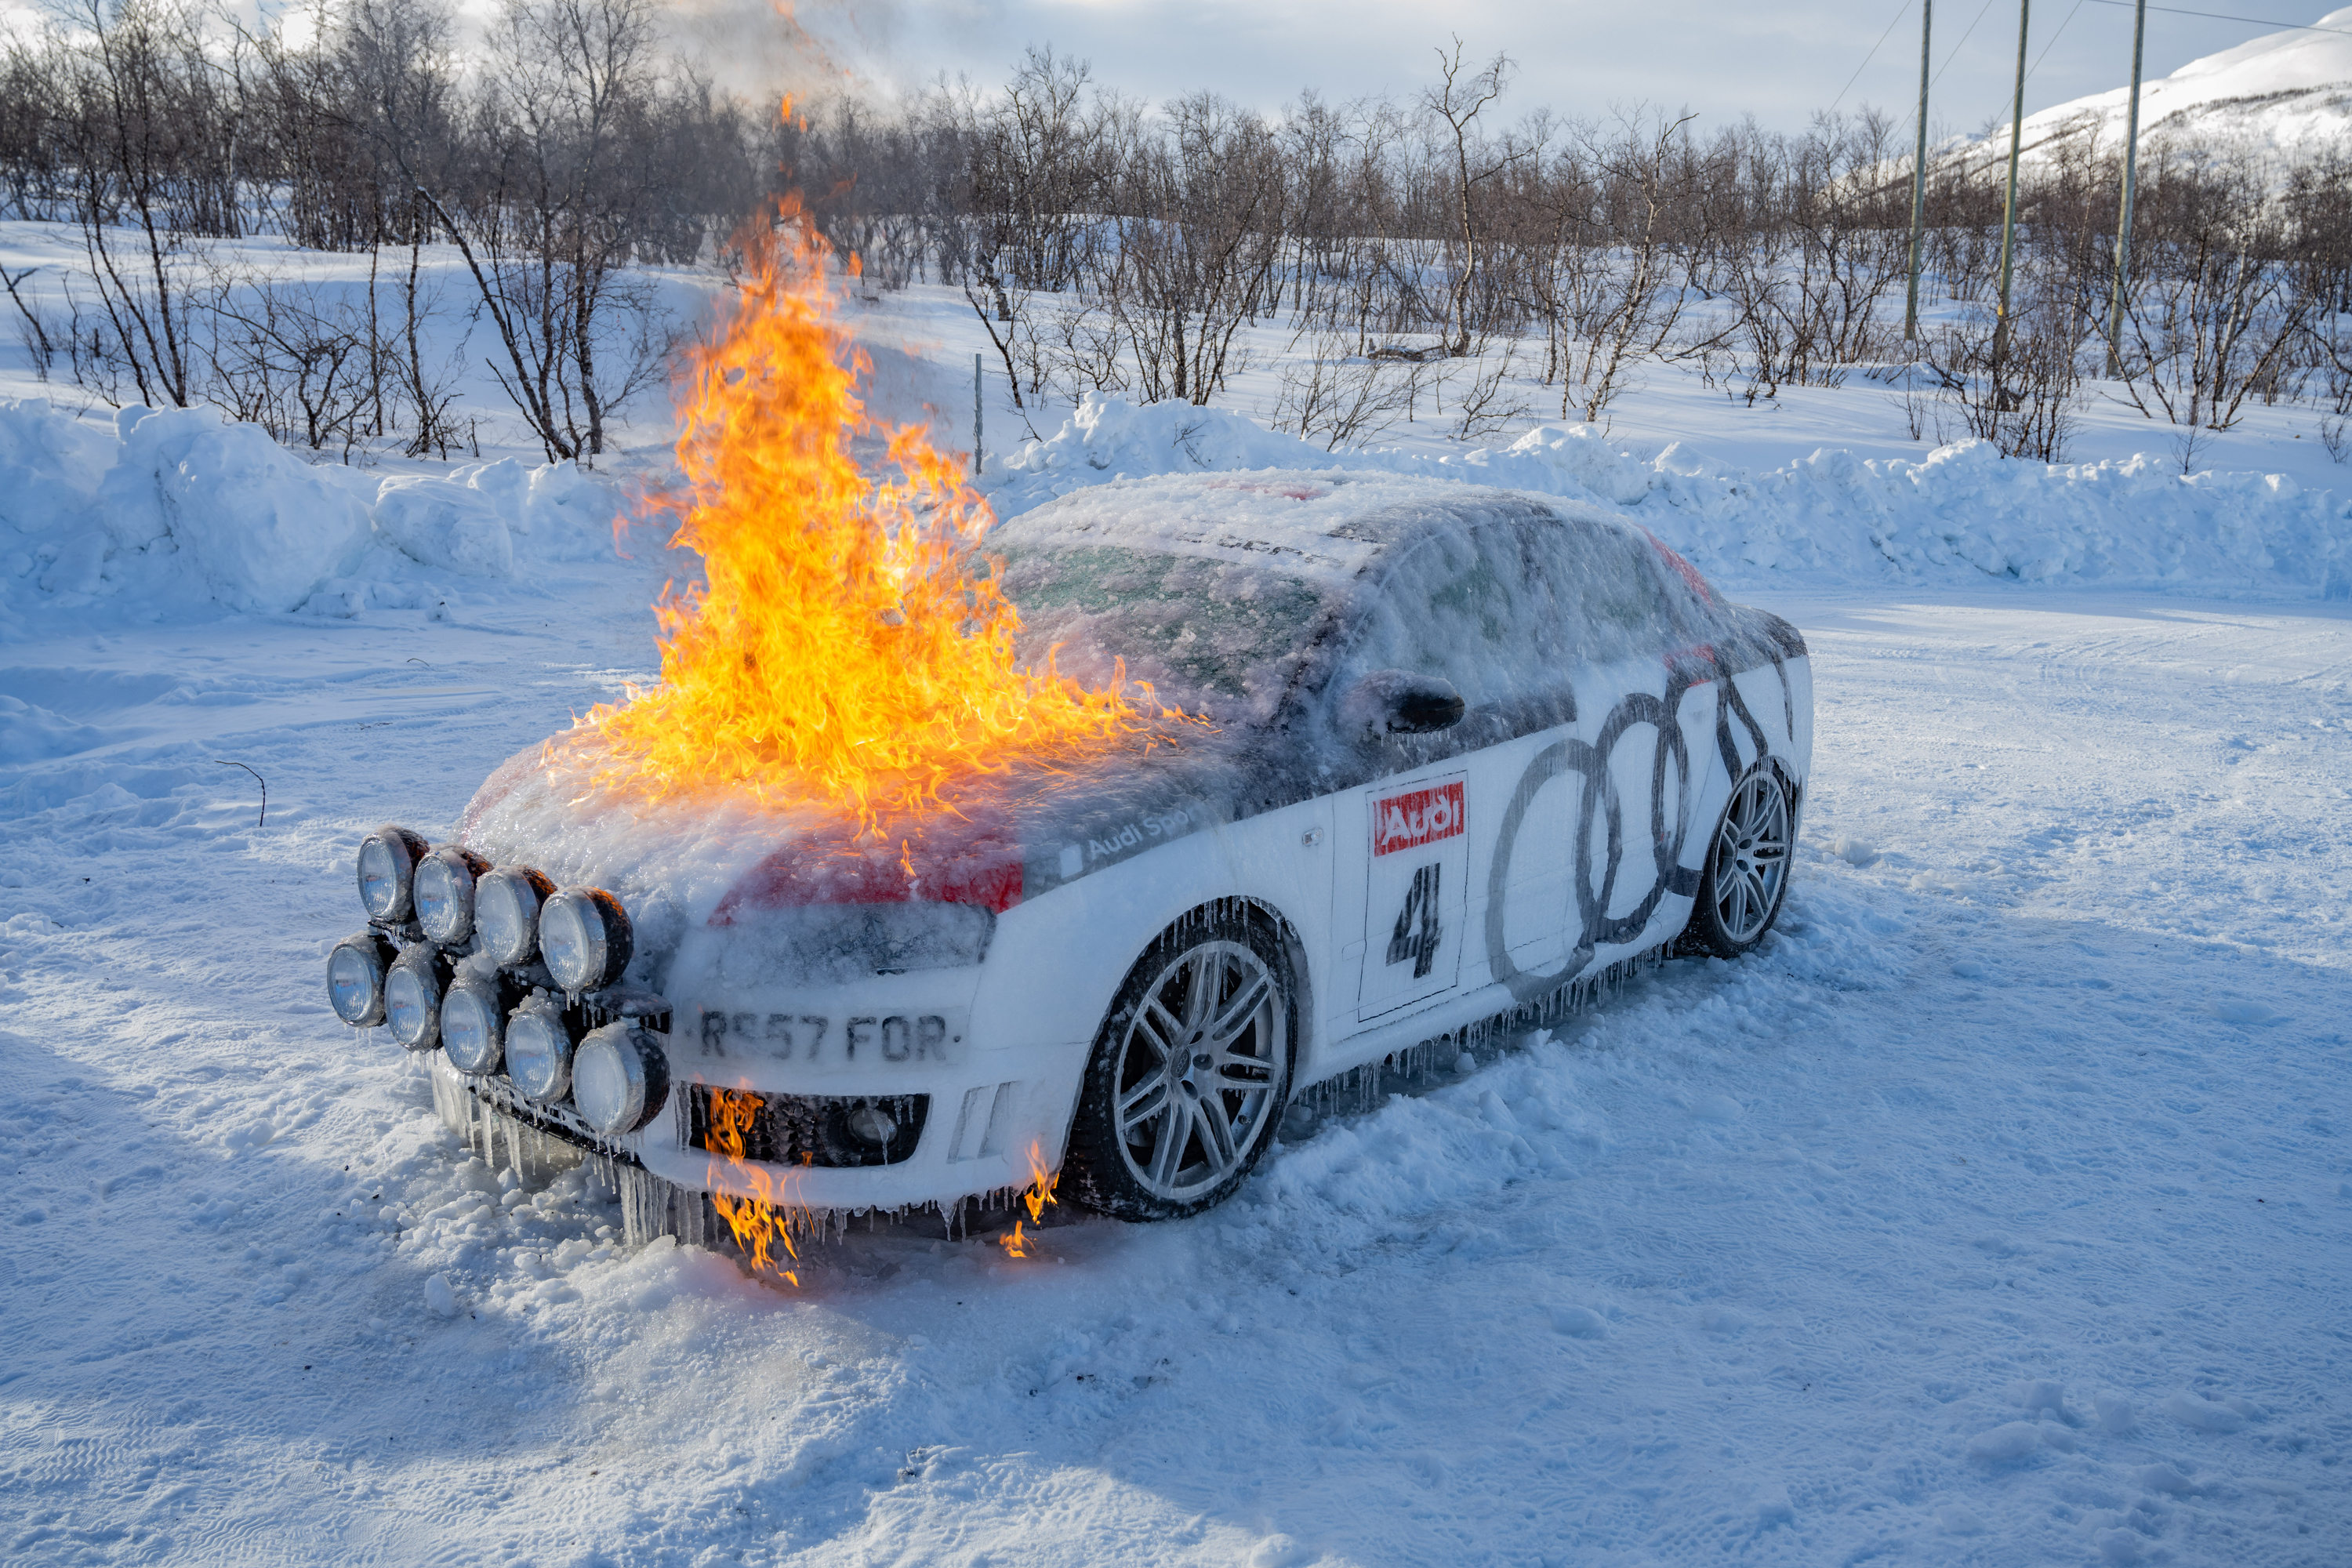 A car on fire from The Grand Tour: A Scandi Flick